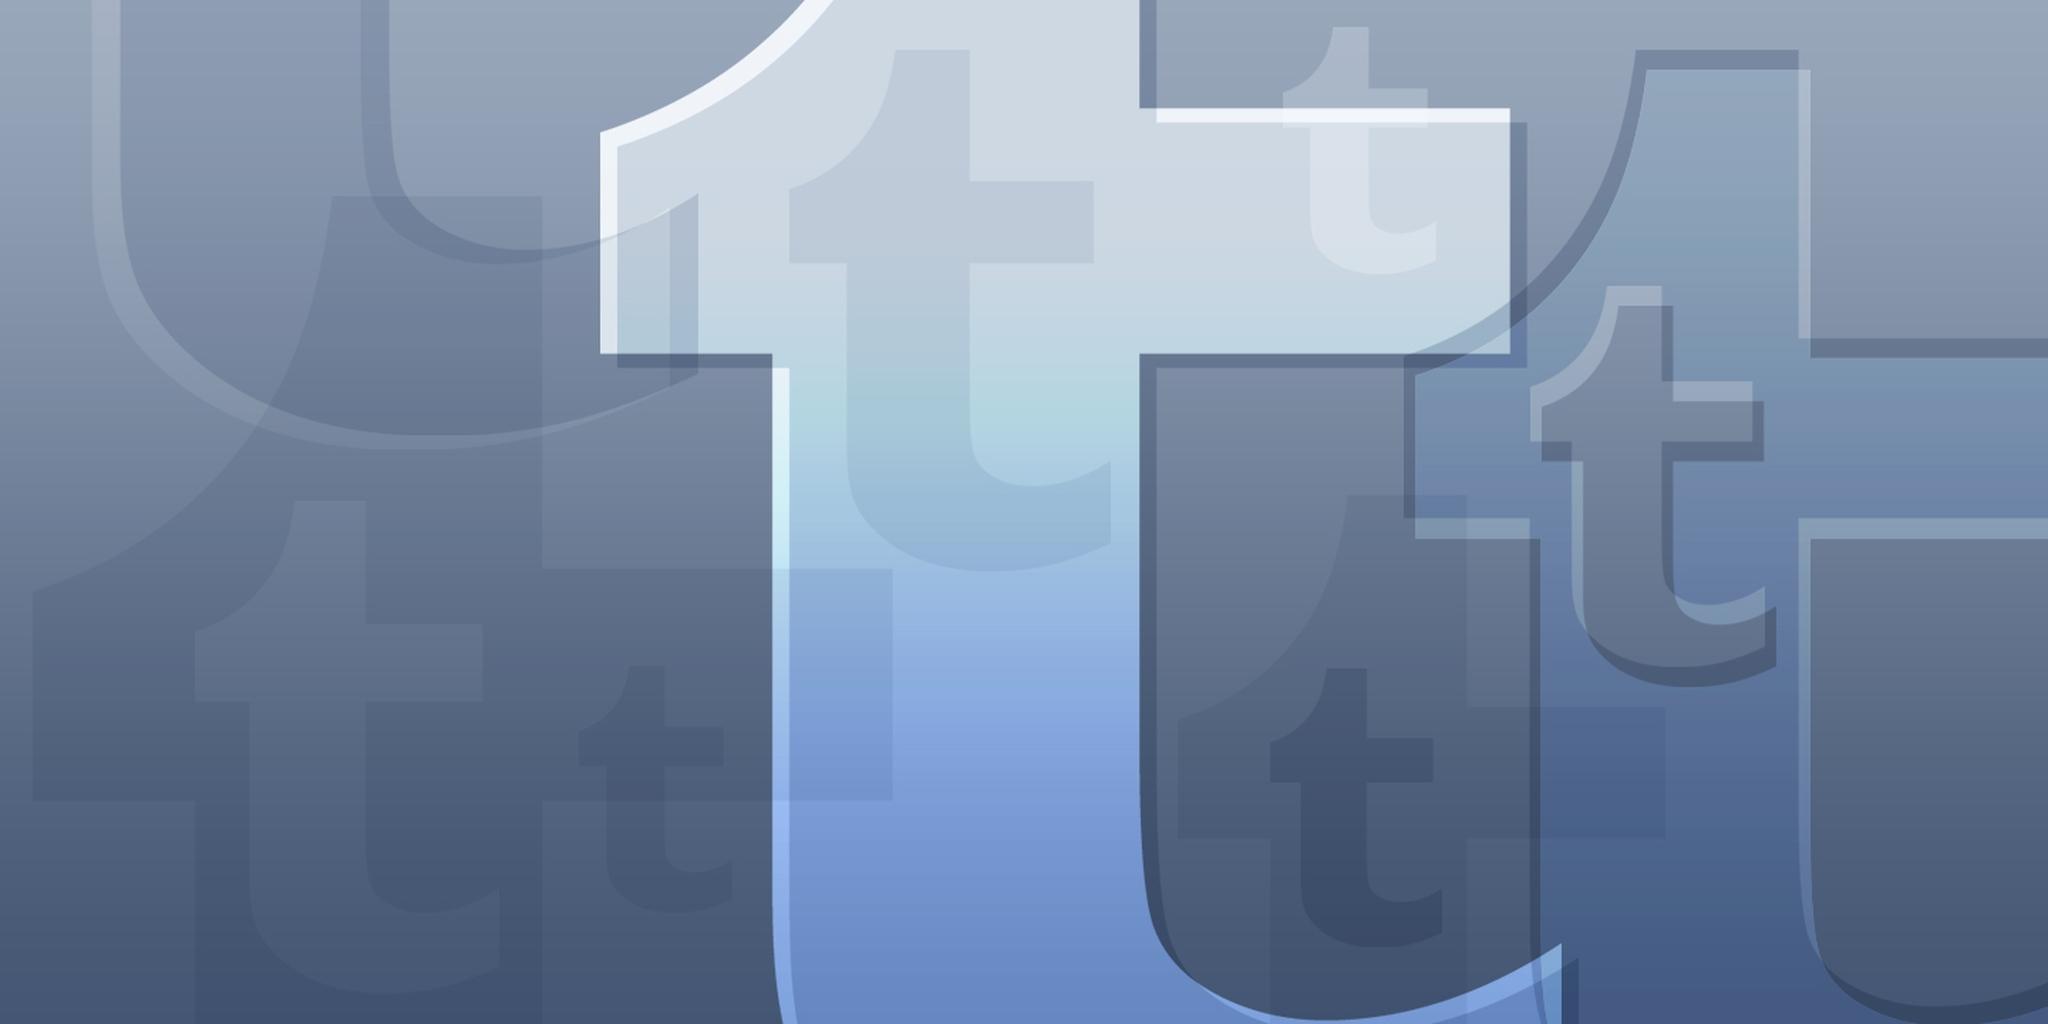 Tumblr T Logo - Behind the scenes of Tumblr's year in review. The Daily Dot